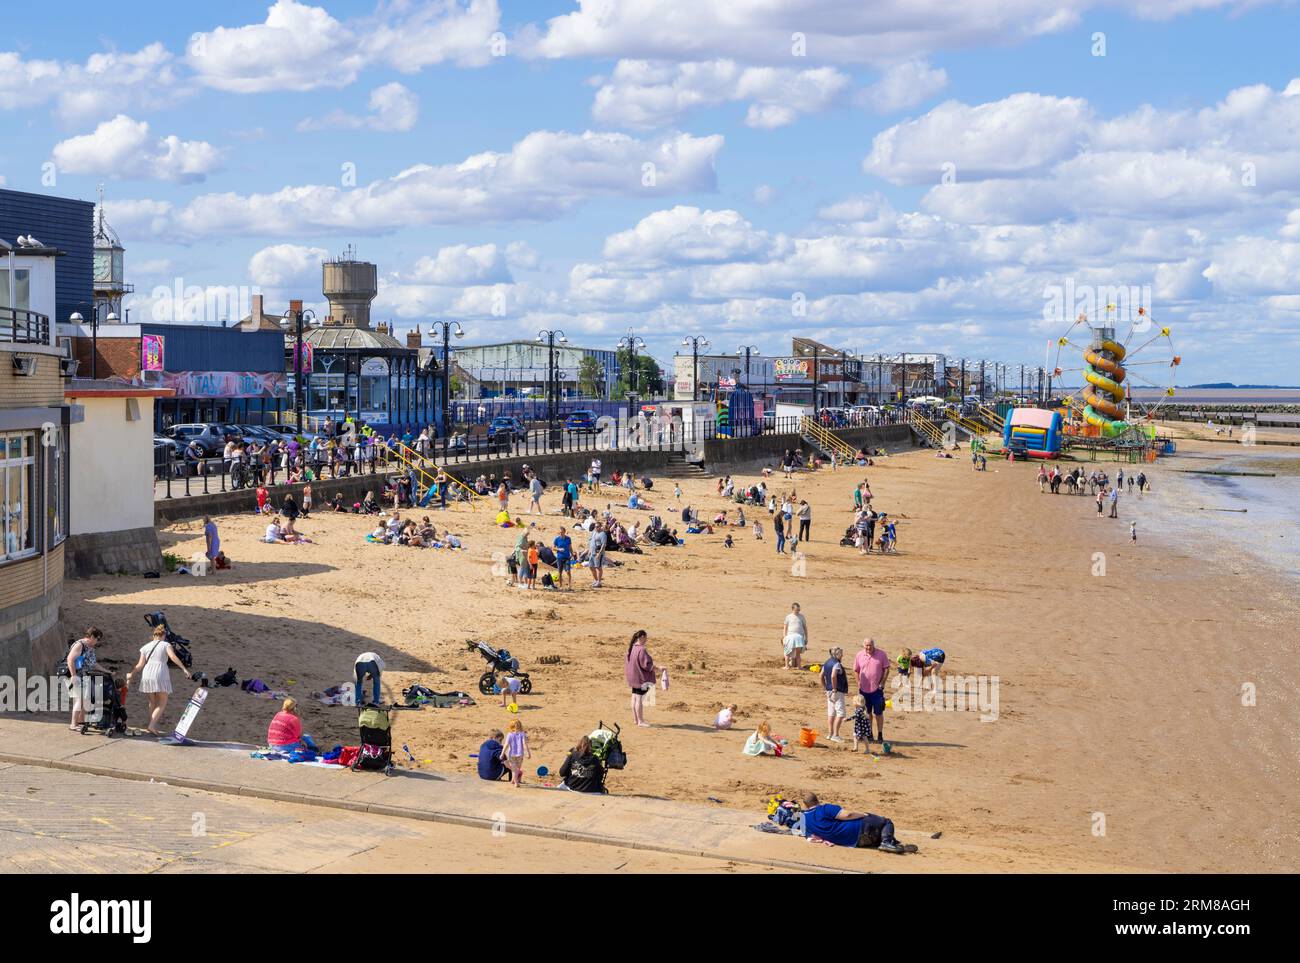 Cleethorpes Beach with Cleethorpes Fun Fair on the sands at Cleethorpes Lincolnshire England UK GB Europe Stock Photo